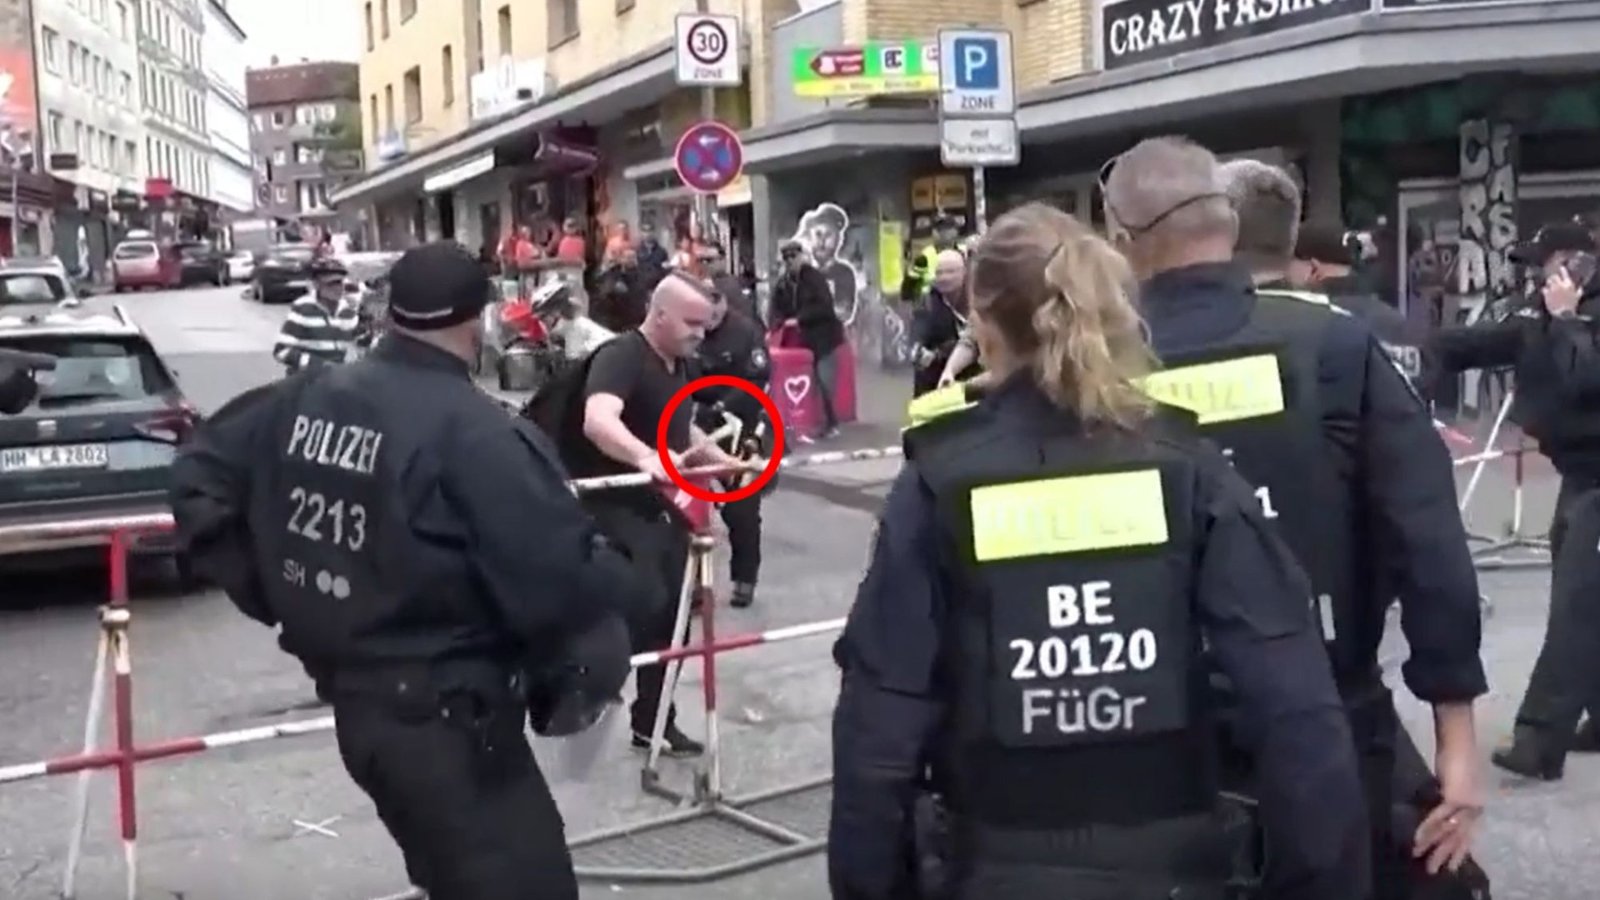 Dramatic moment German cops shoot axeman carrying molotov cocktail near Euros fan zone ahead of Netherlands clash